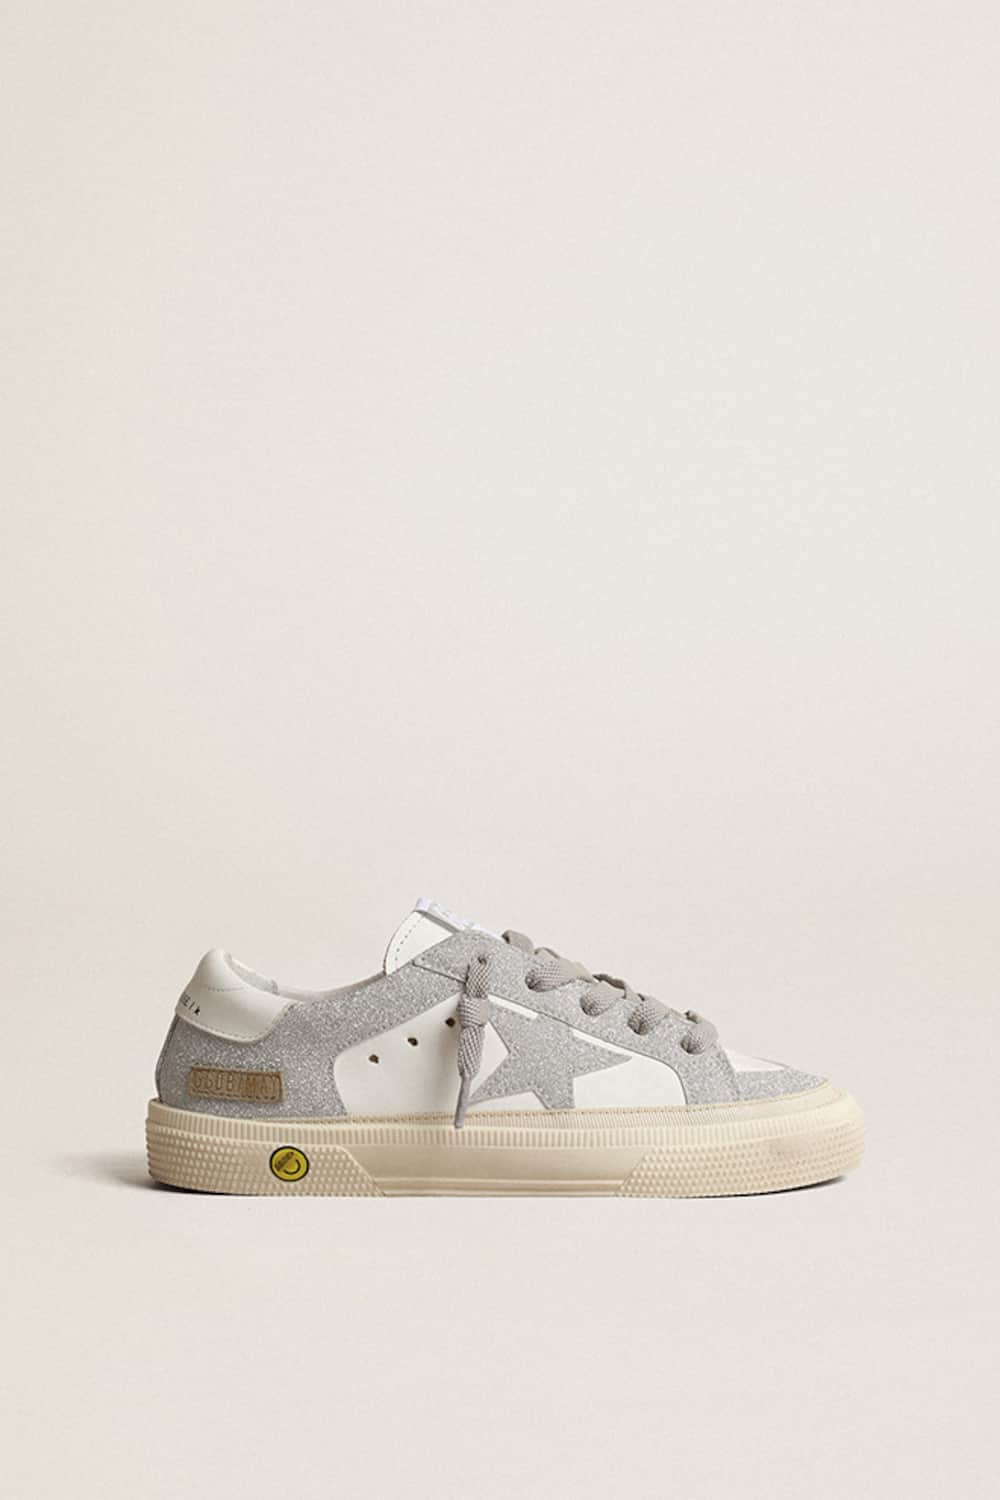 Golden Goose - May Young in pelle bianca e glitter argento in 